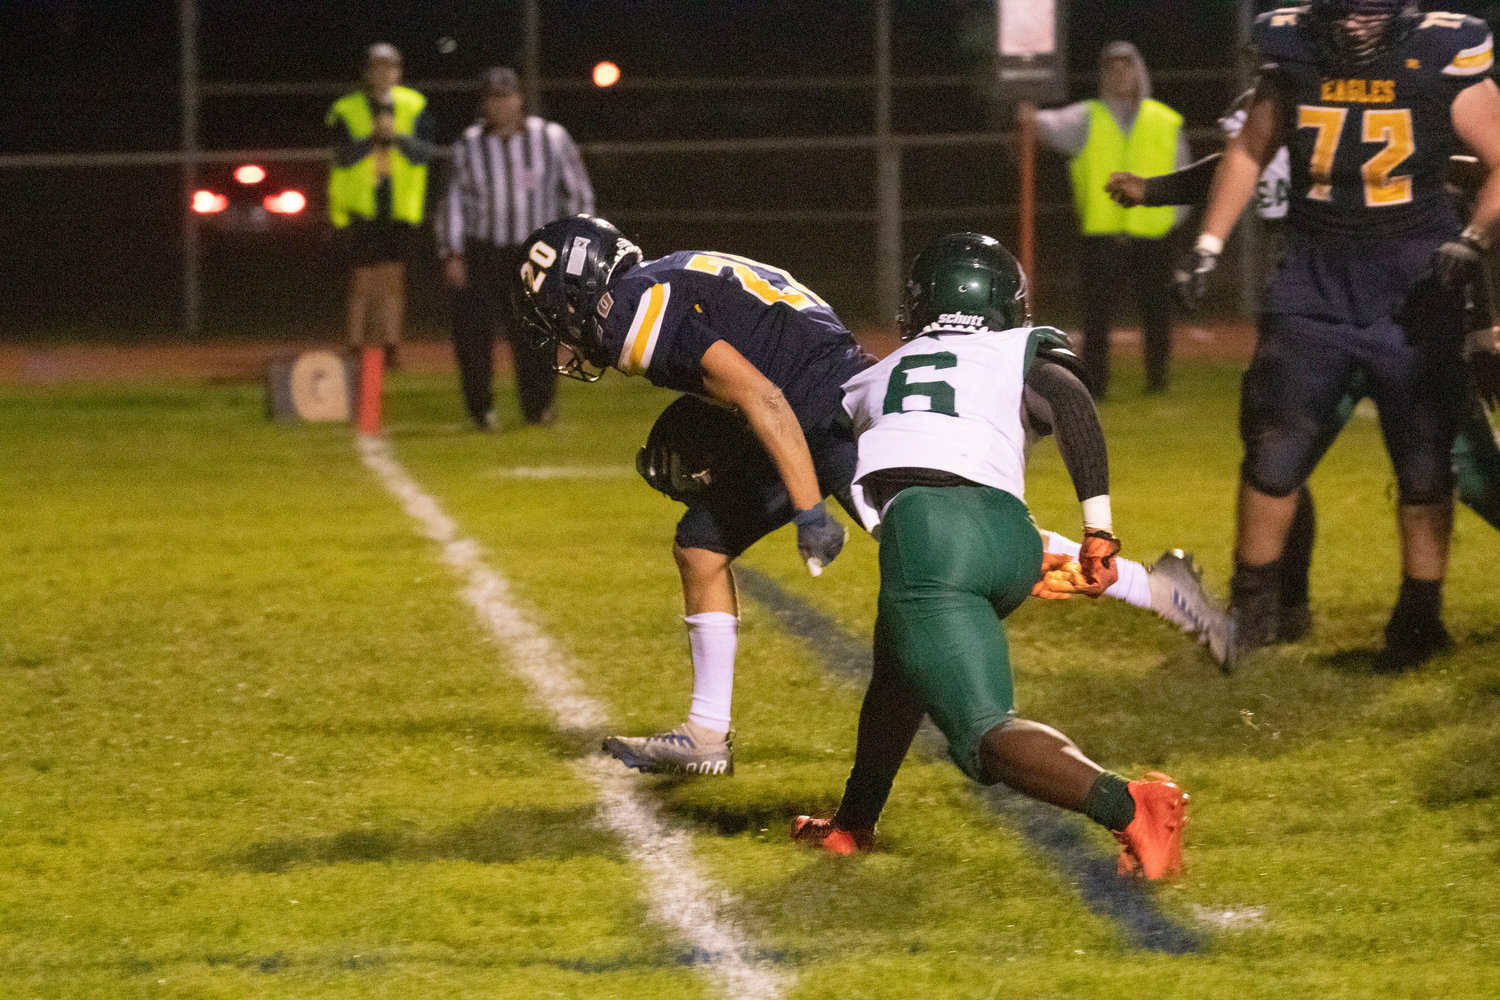 AJ DiOrio sprints into the end zone during the Eagles' game against Cranston East on Friday night.